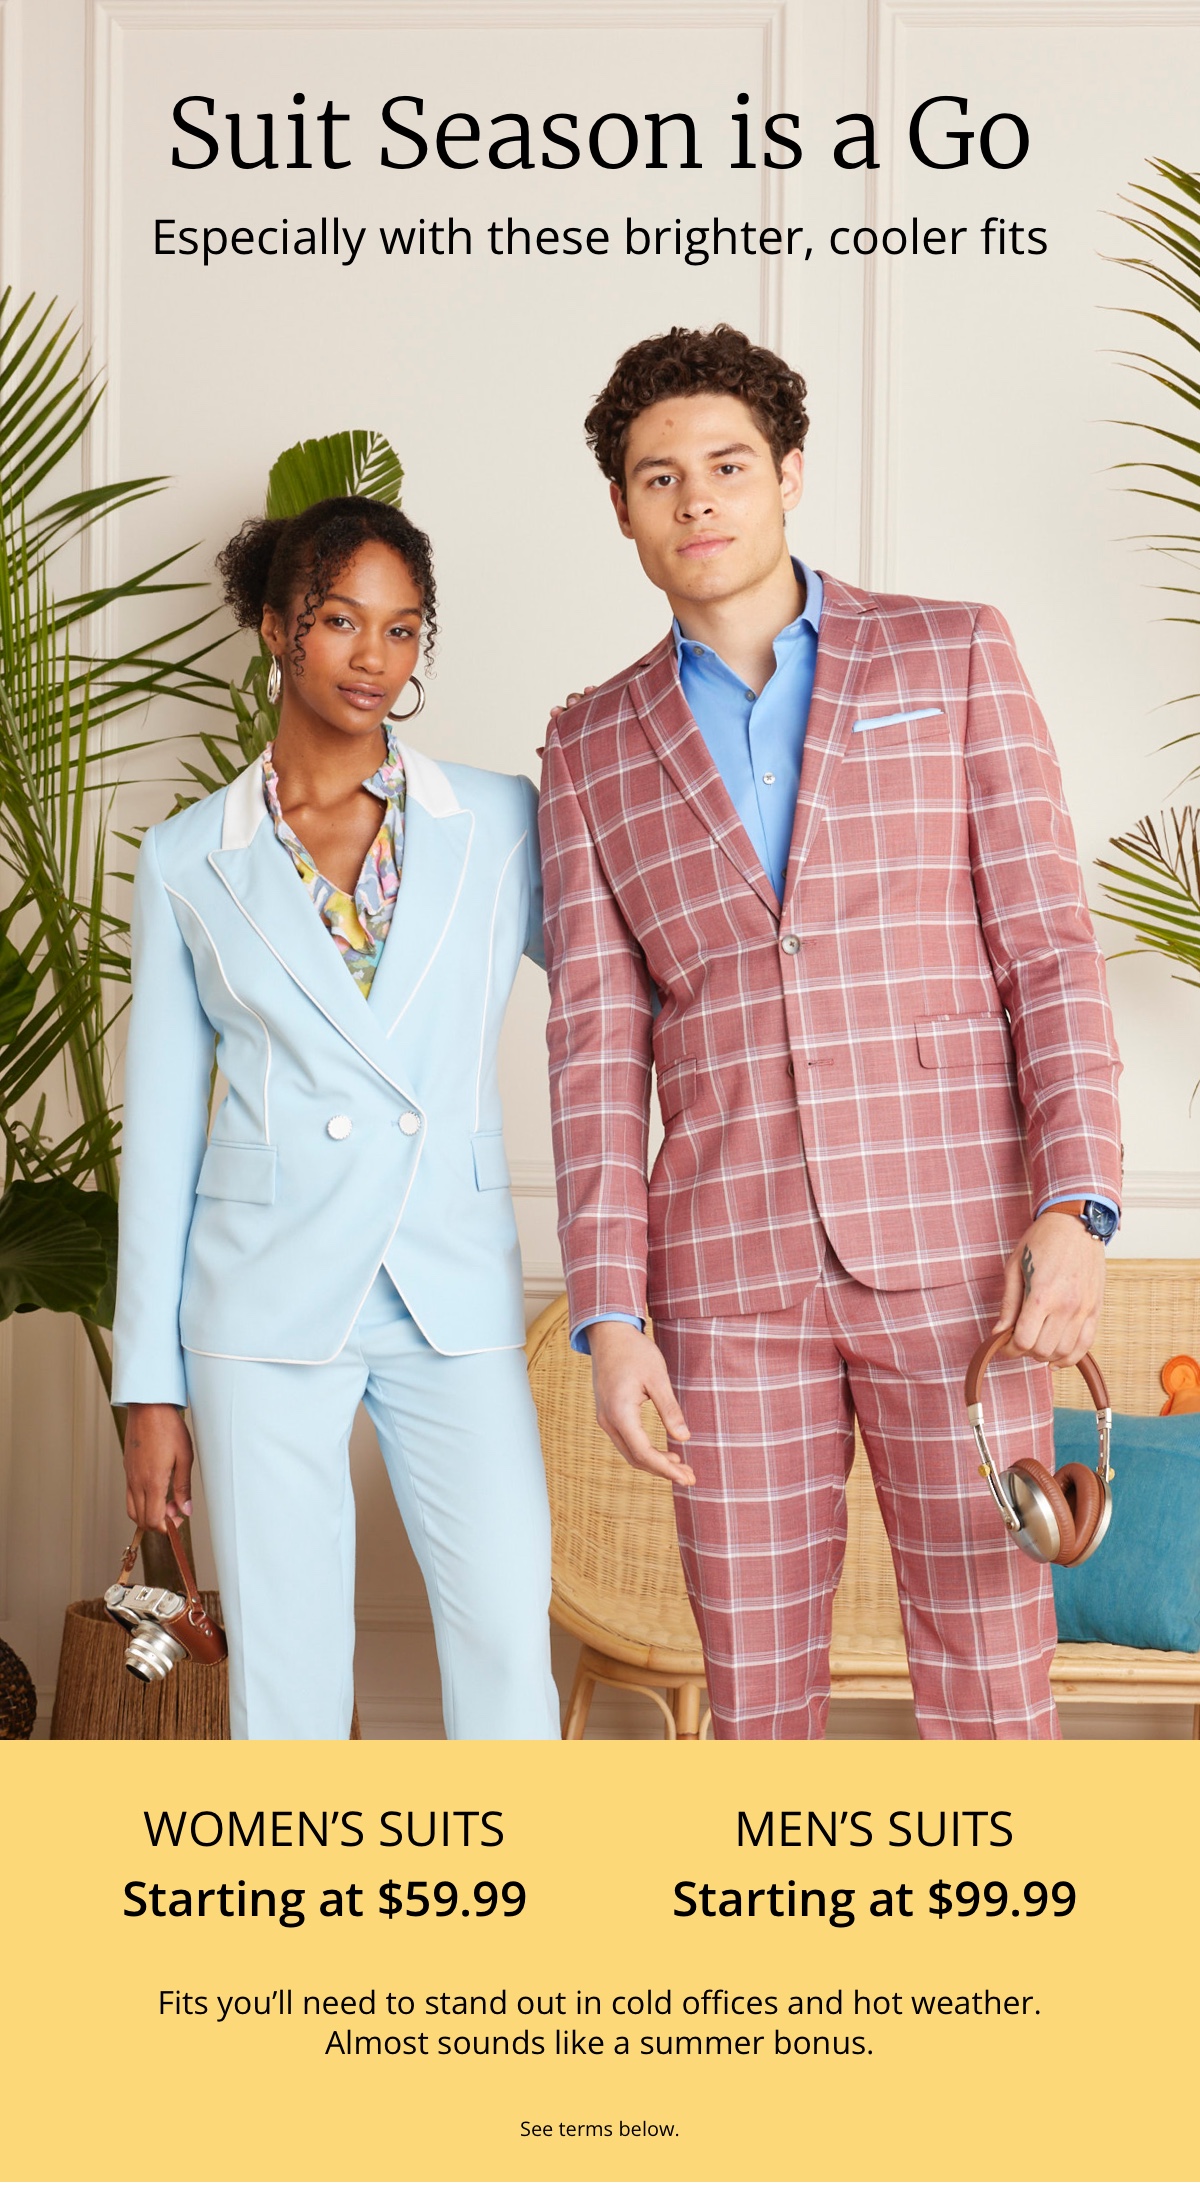 Suit Season is a Go|Especially with these brighter, cooler fits|Womens Suits|Starting at $59.99|Mens Suits|Starting at $99.99|Fits youll need to stand out in cold offices and hot weather. Almost sounds like a summer bonus|See terms below.